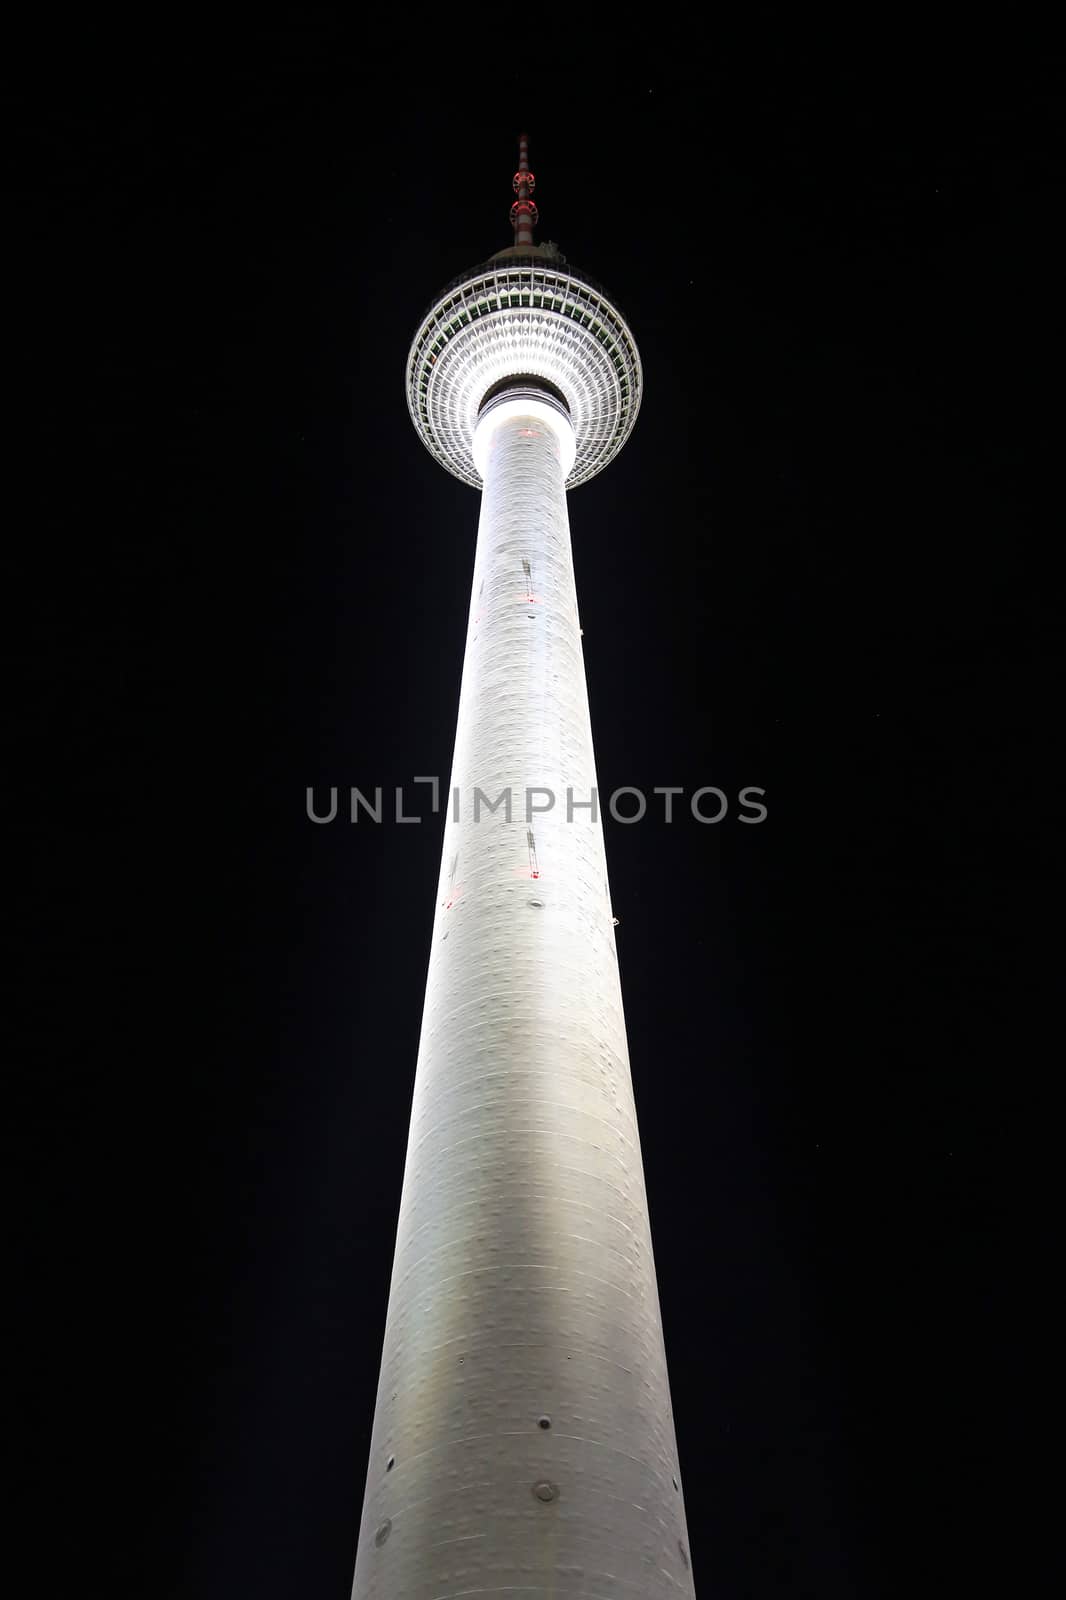 The Fernsehturm (TV Tower) is a television tower in central Berlin - Germany